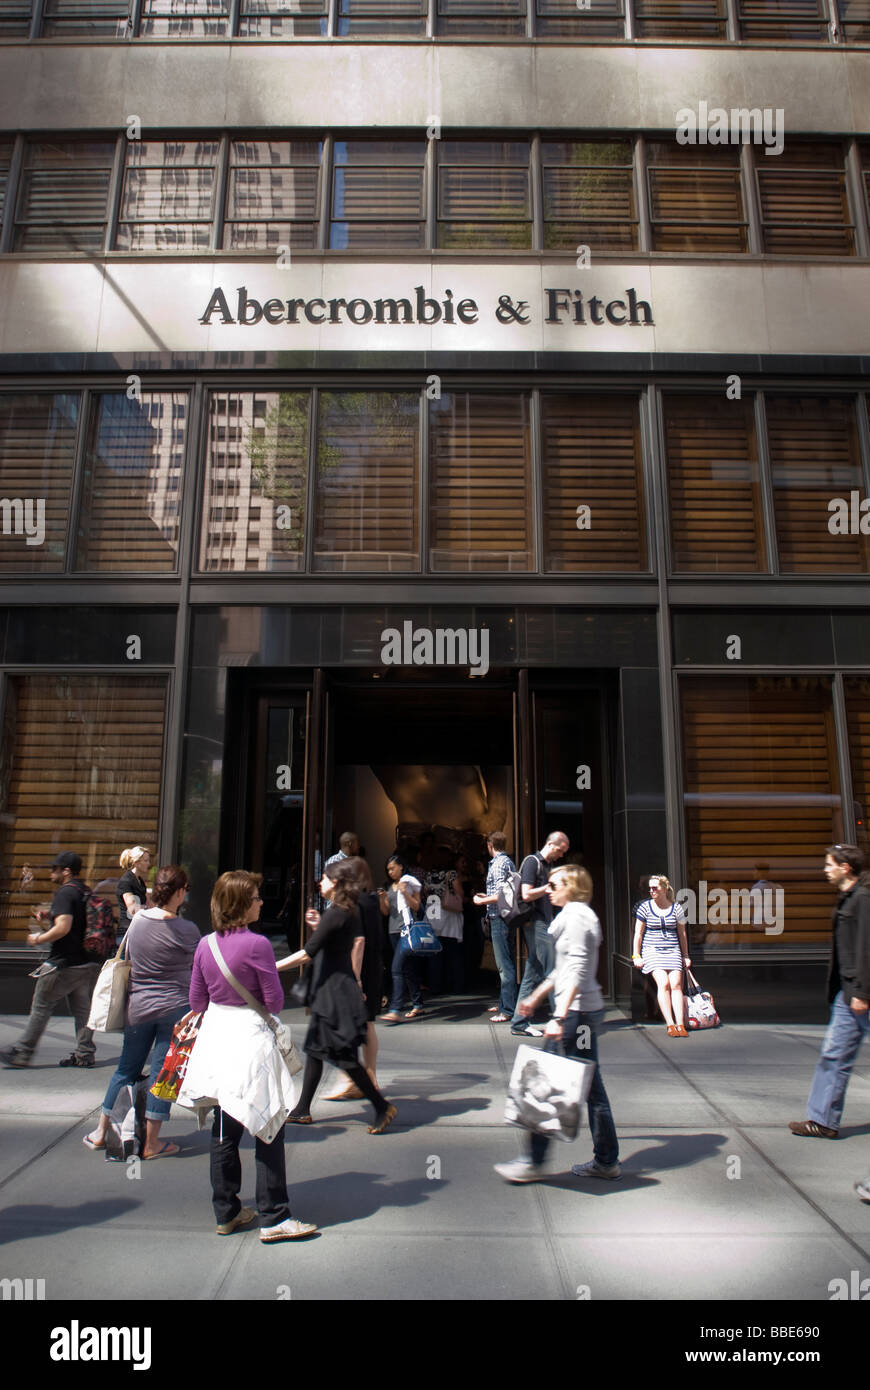 abercrombie and fitch manhattan